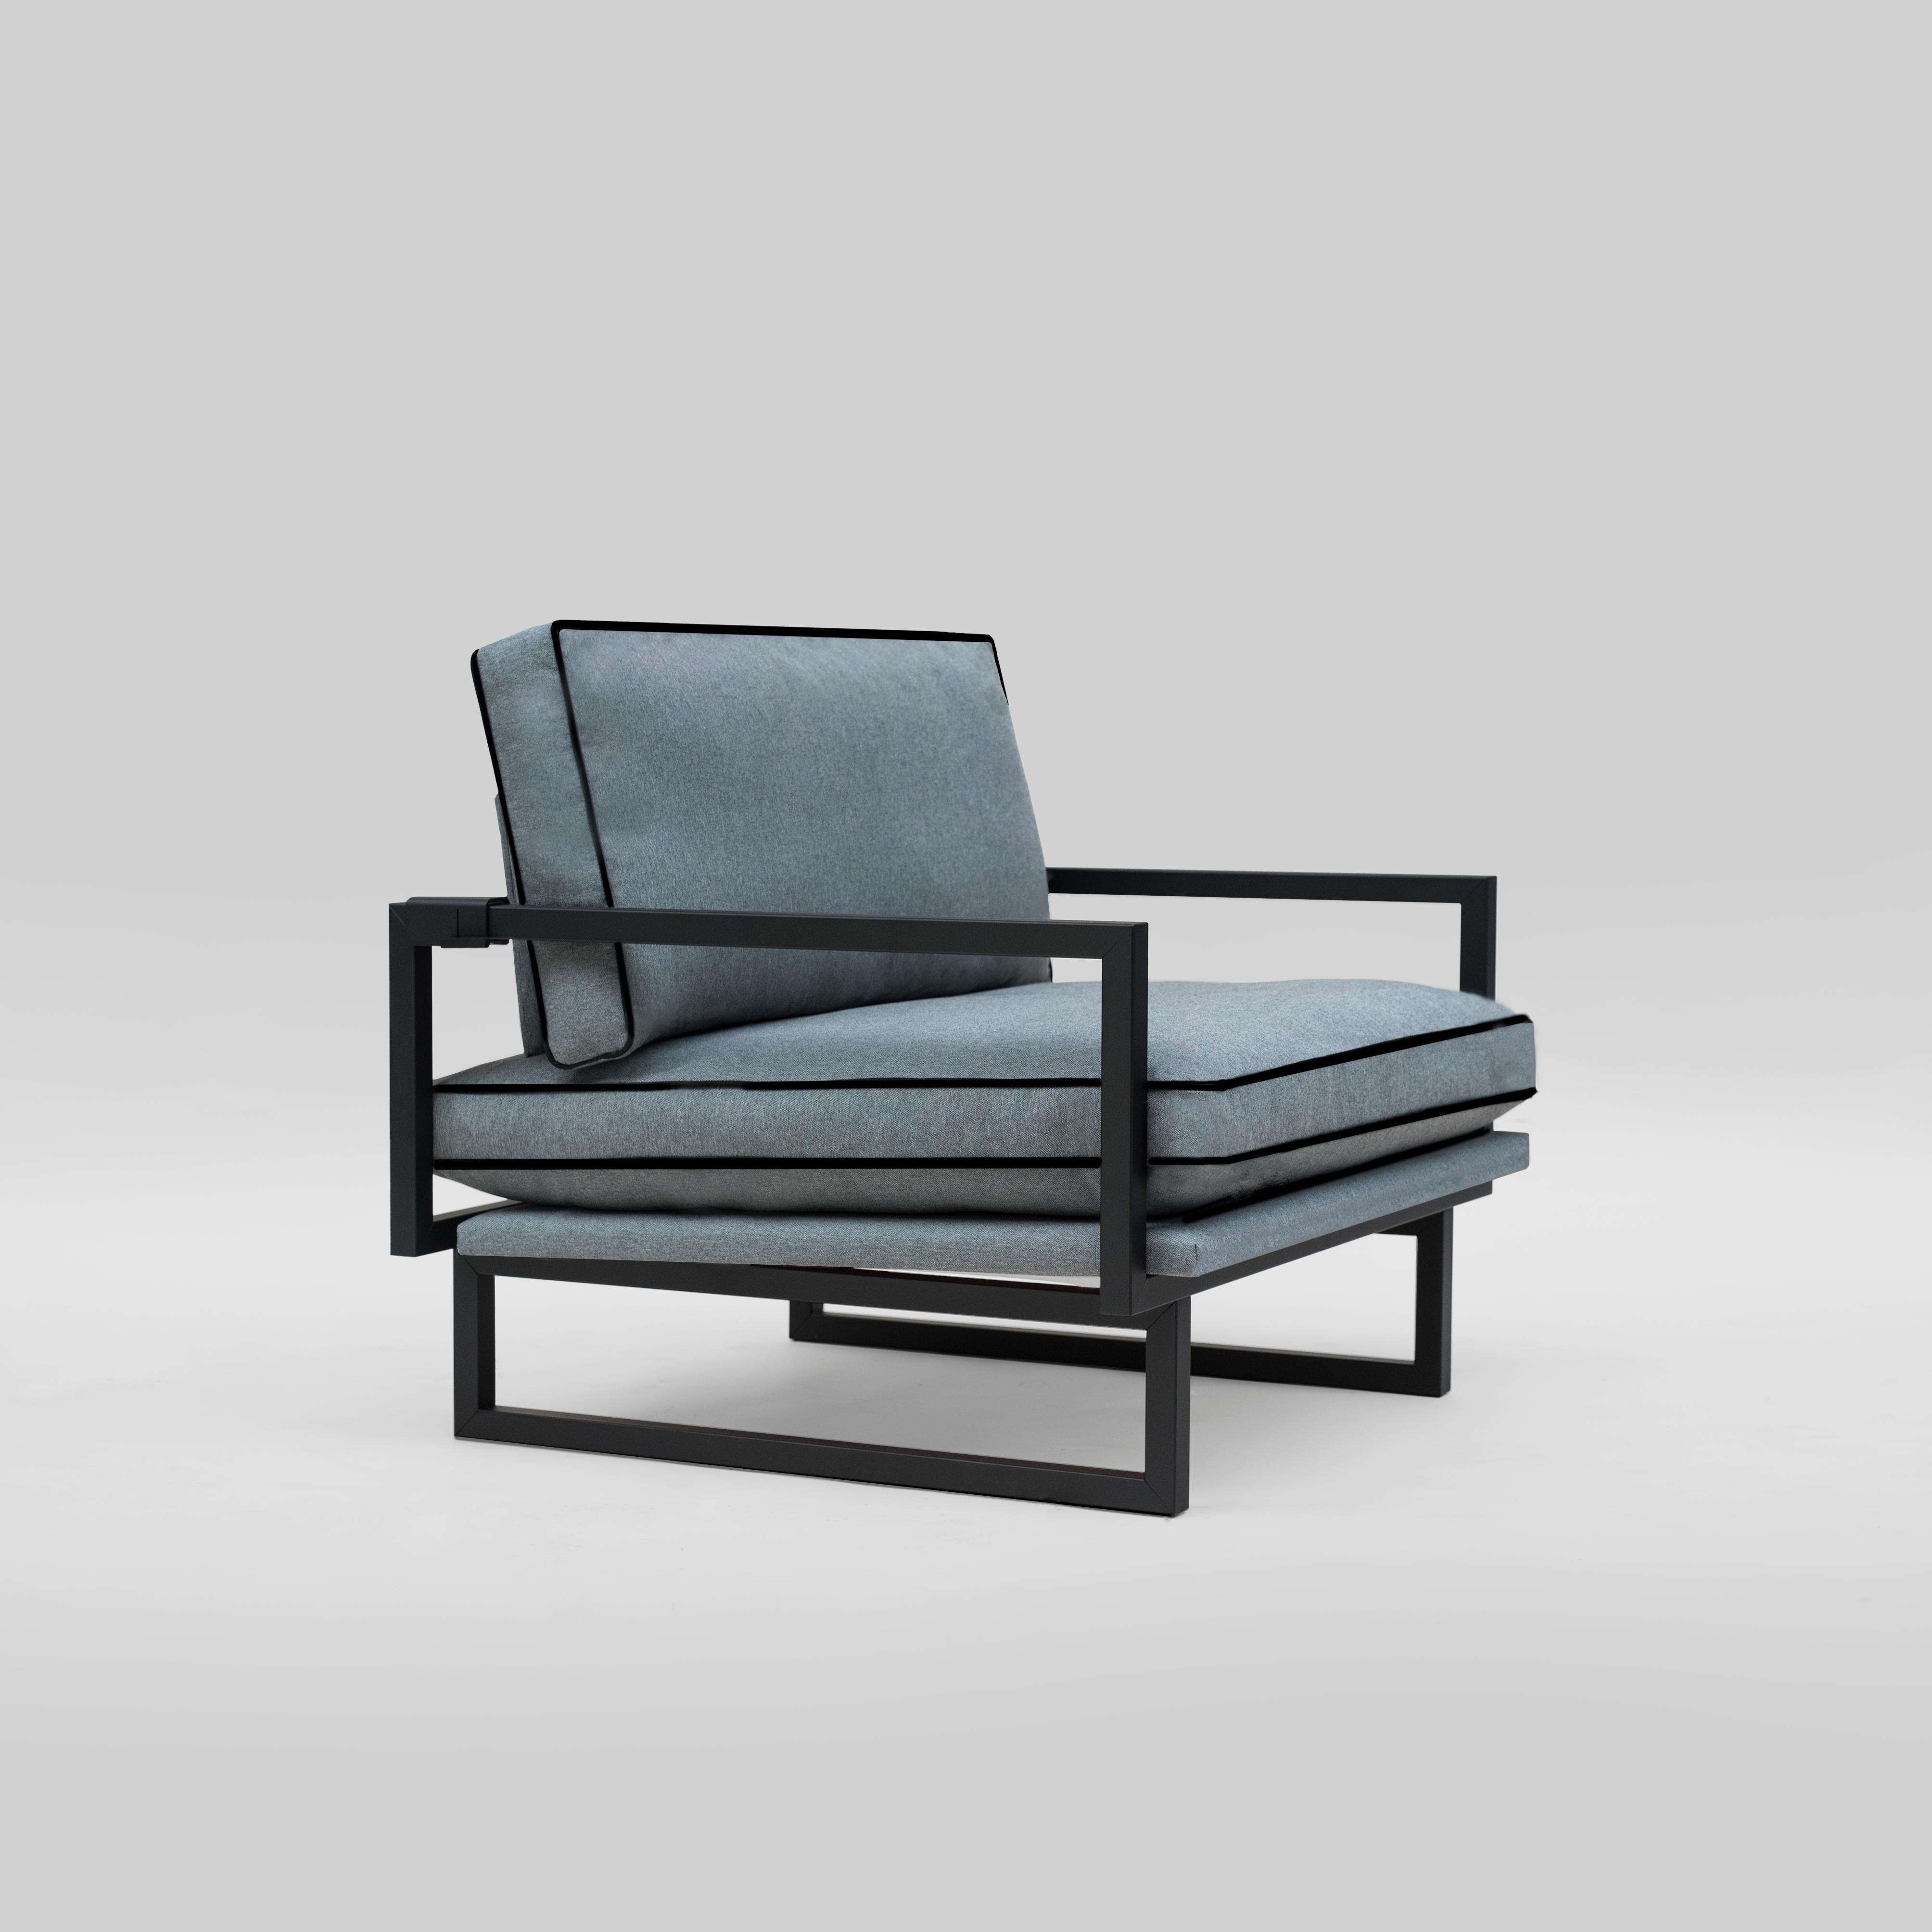 Armchair designed by Peter Ghyczy in 2009.
Manufactured by Ghyczy (Netherlands)

This armchair has an airy and light weight architectural construction. The GP01 is designed with an adjustable backrest, which allows to adjust the seat